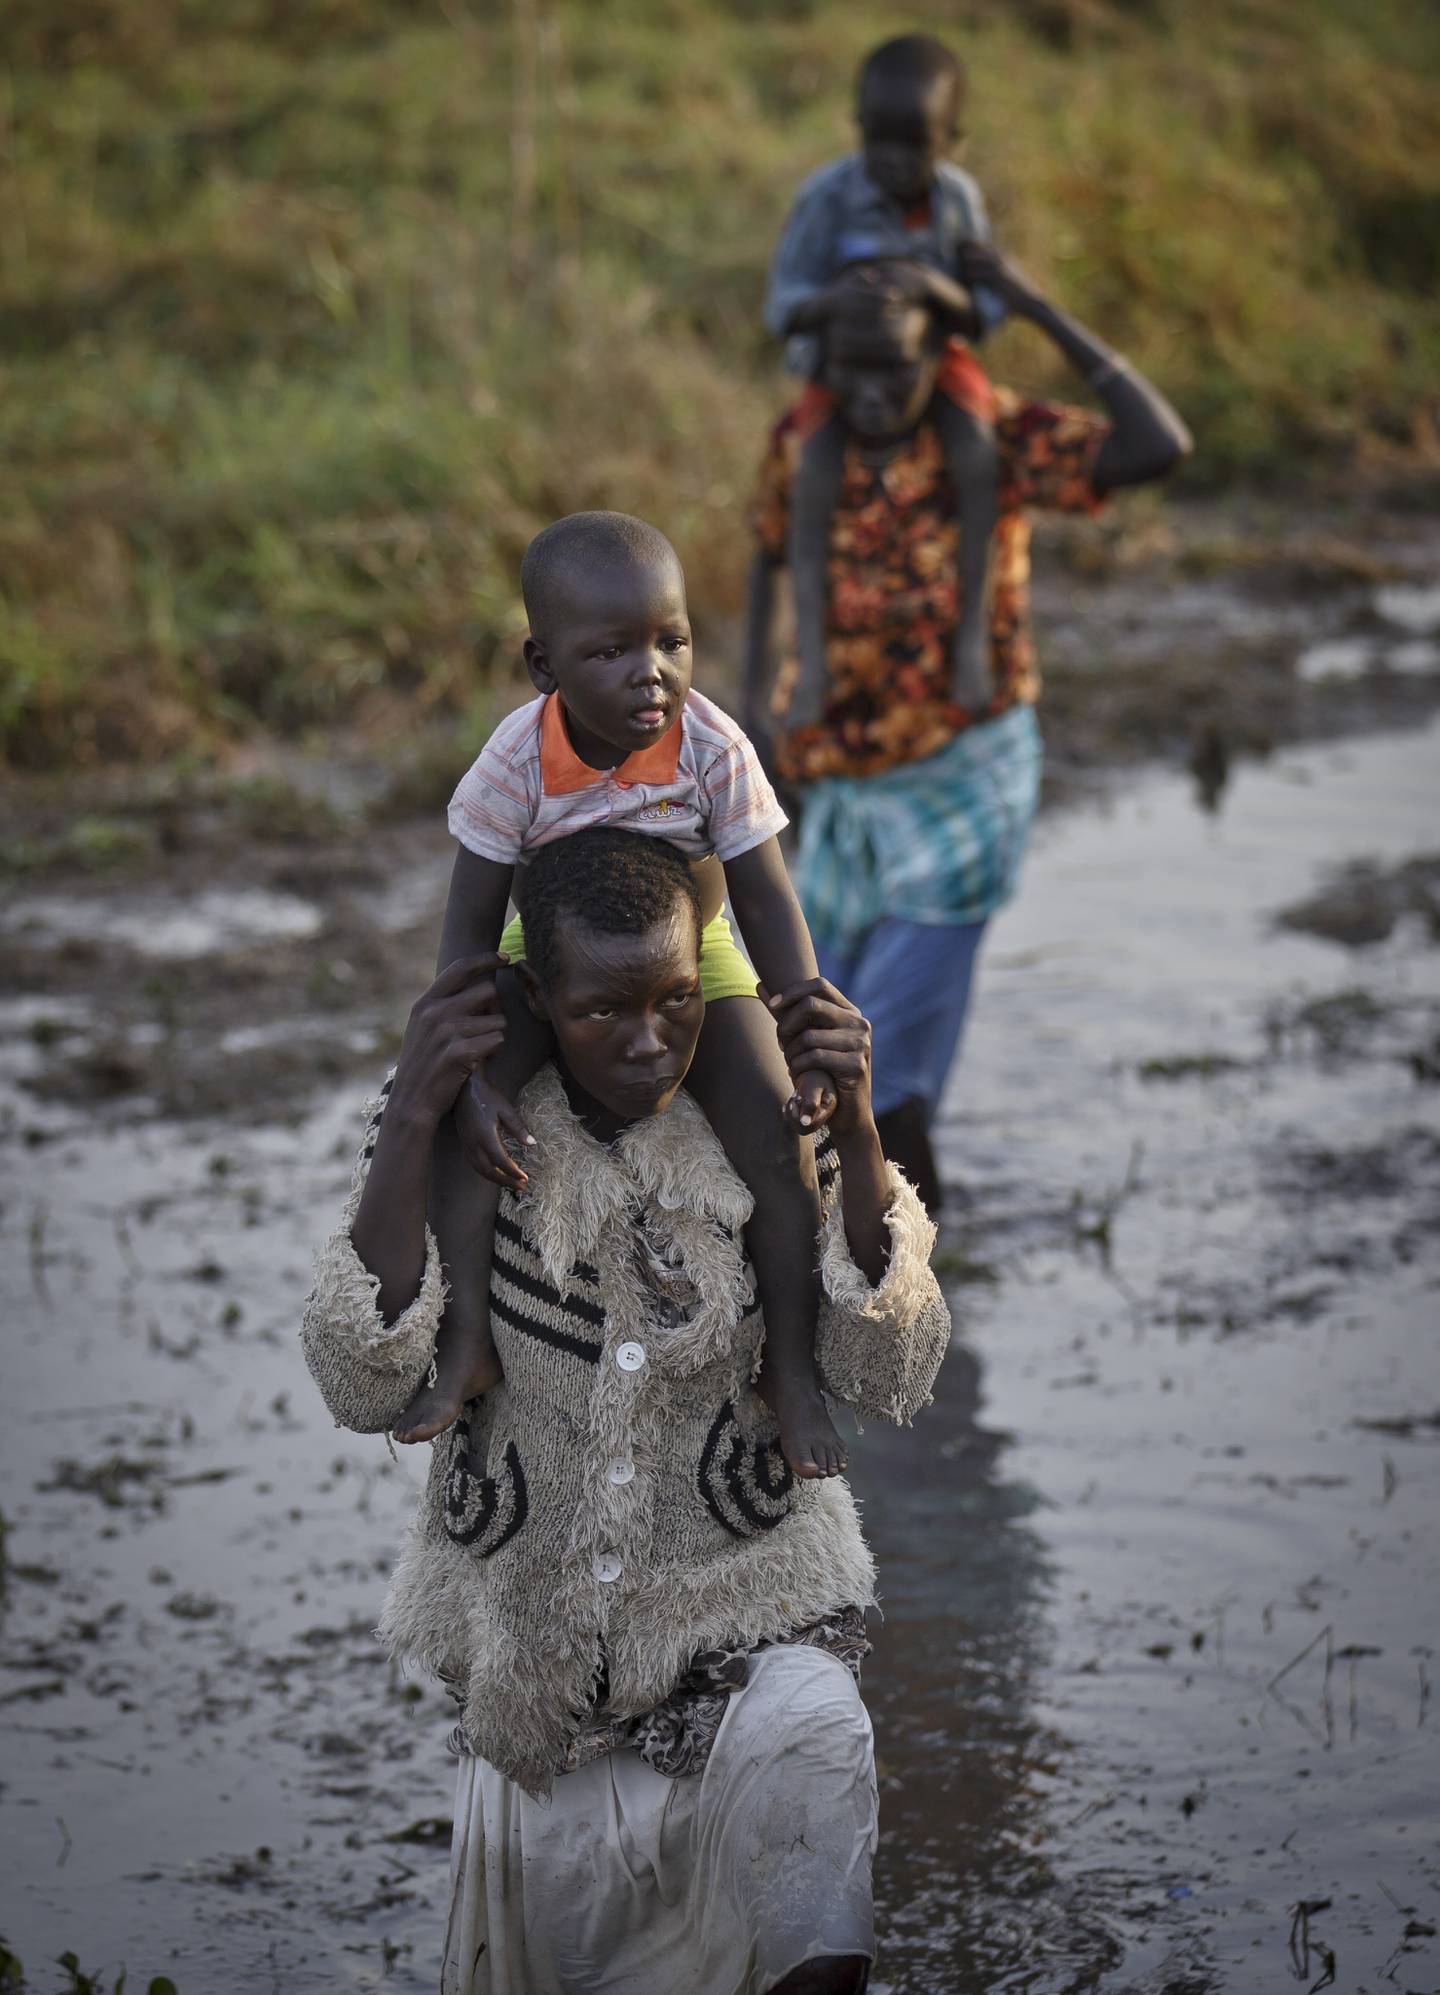 Displaced people wade through mud as they get off a river barge from Bor, some of the thousands who fled the recent fighting between government and rebel forces in Bor by boat across the White Nile, in the town of Awerial, South Sudan Thursday, Jan. 2, 2014.